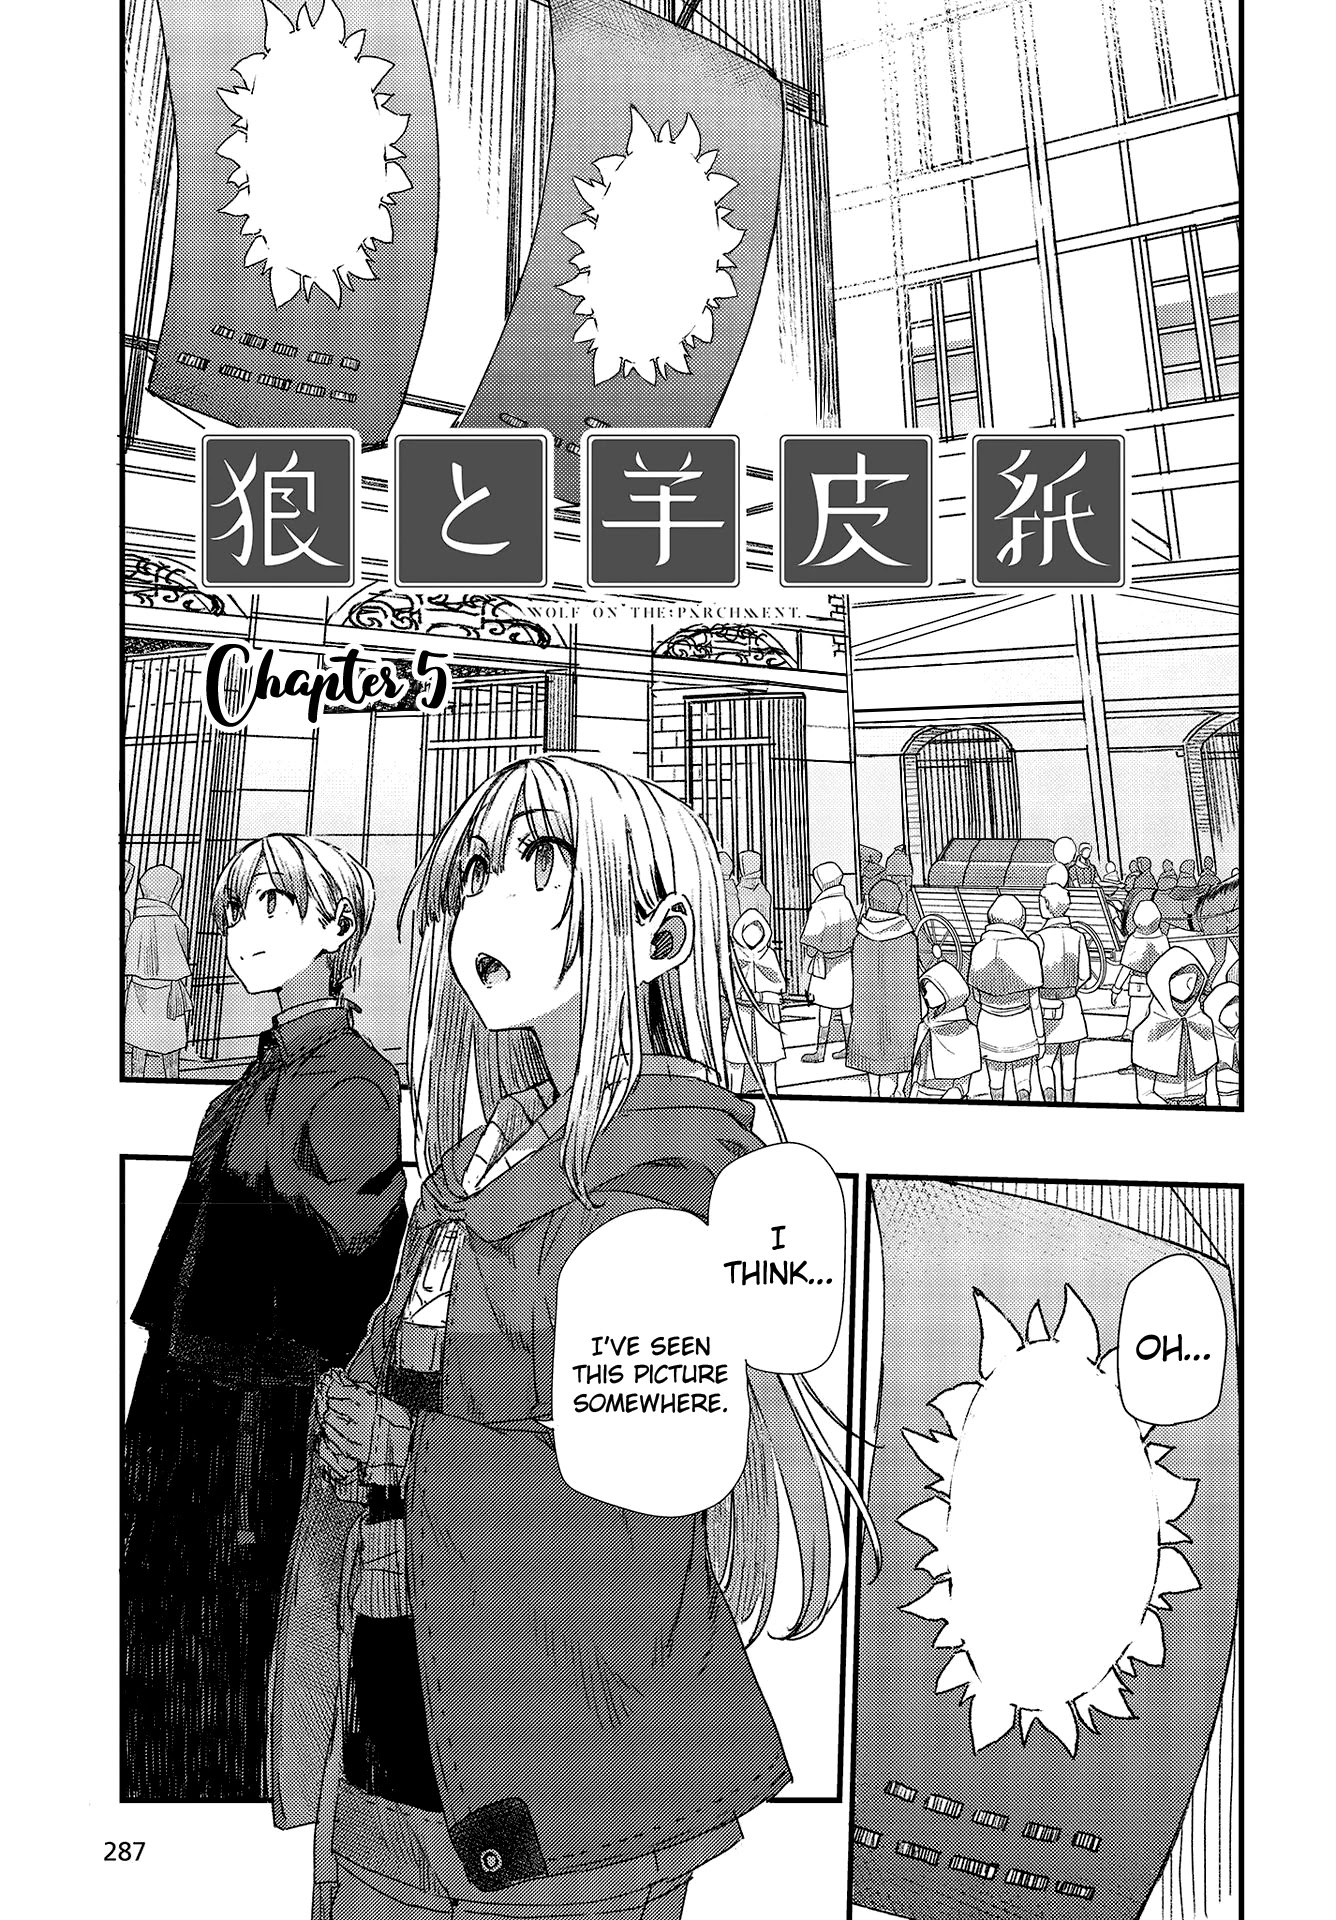 Wolf & Parchment: New Theory Spice & Wolf Chapter 5 #1